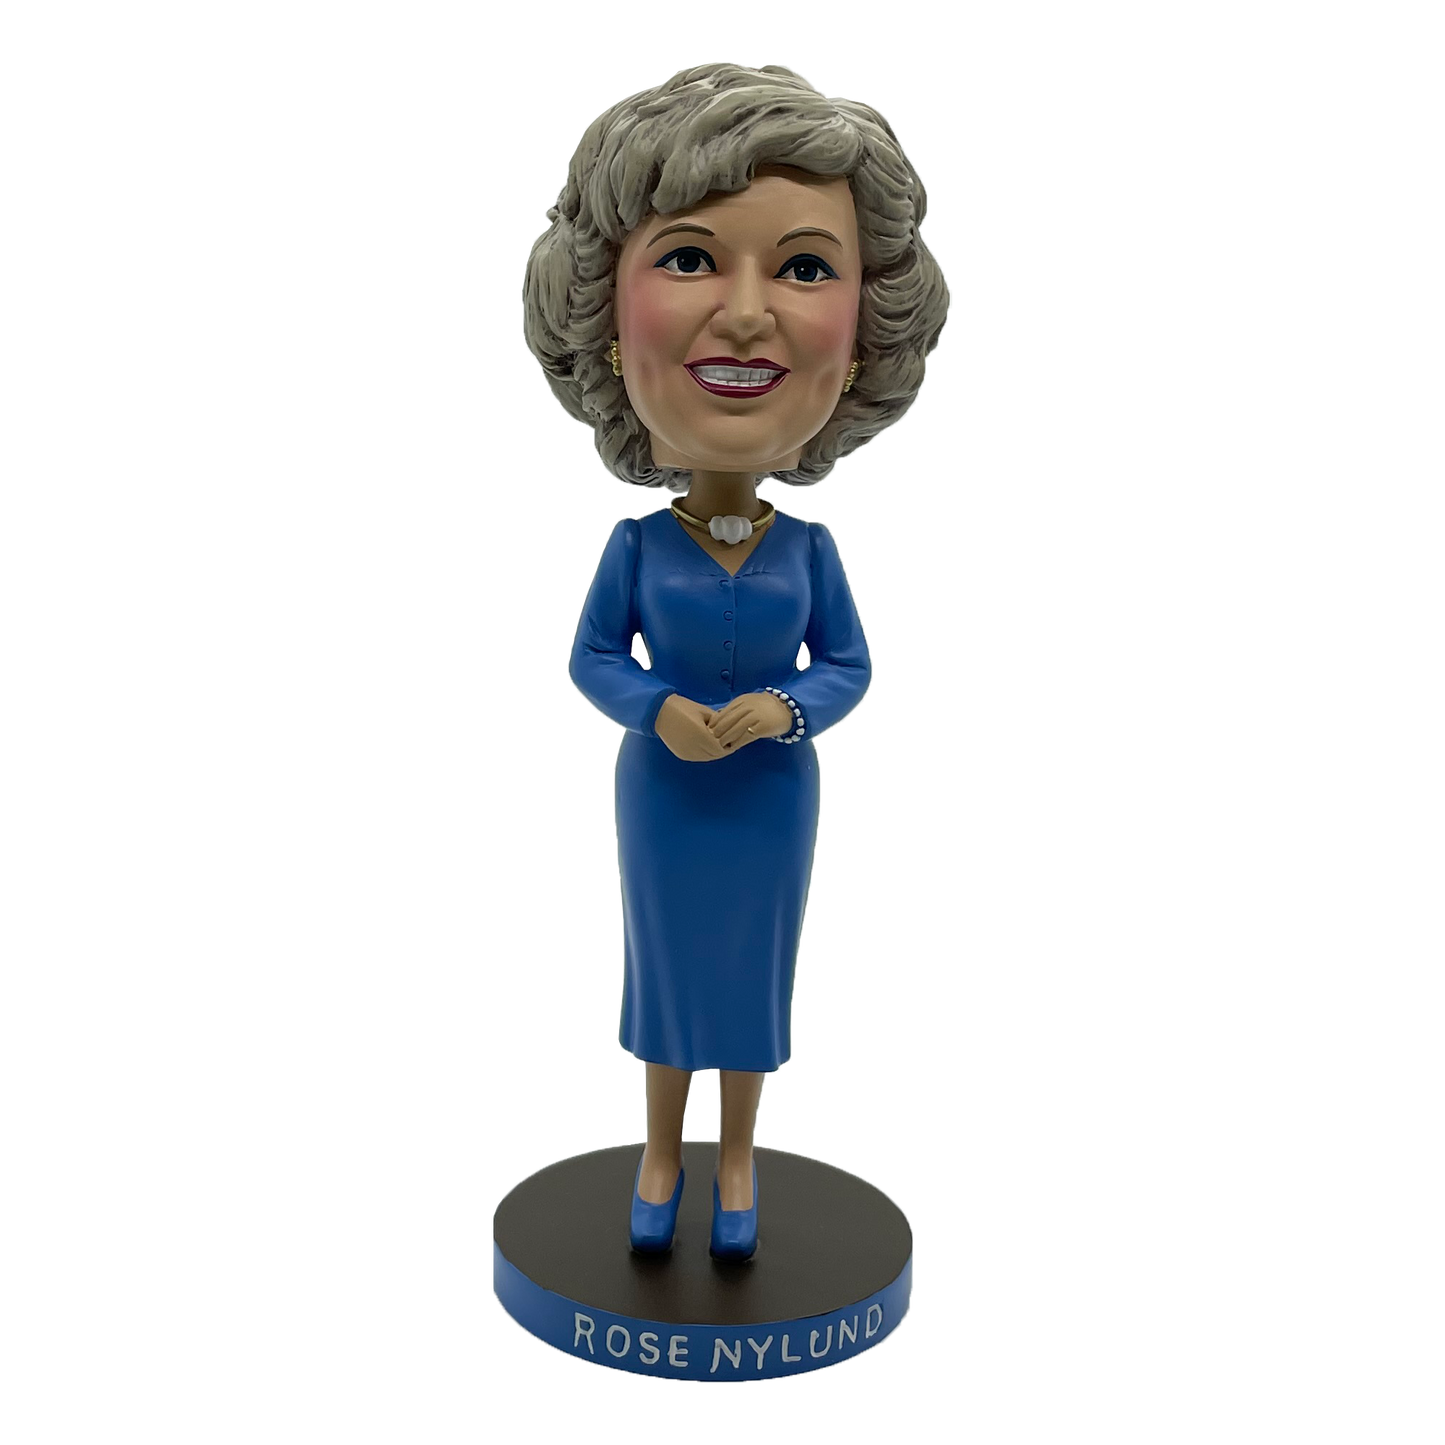 The Golden Girls Rose Nylund Blue Dress Polystone Bobblehead (National Bobblehead Hall of Fame Exclusive) - Available 3rd Quarter 2022 - Icon Heroes 